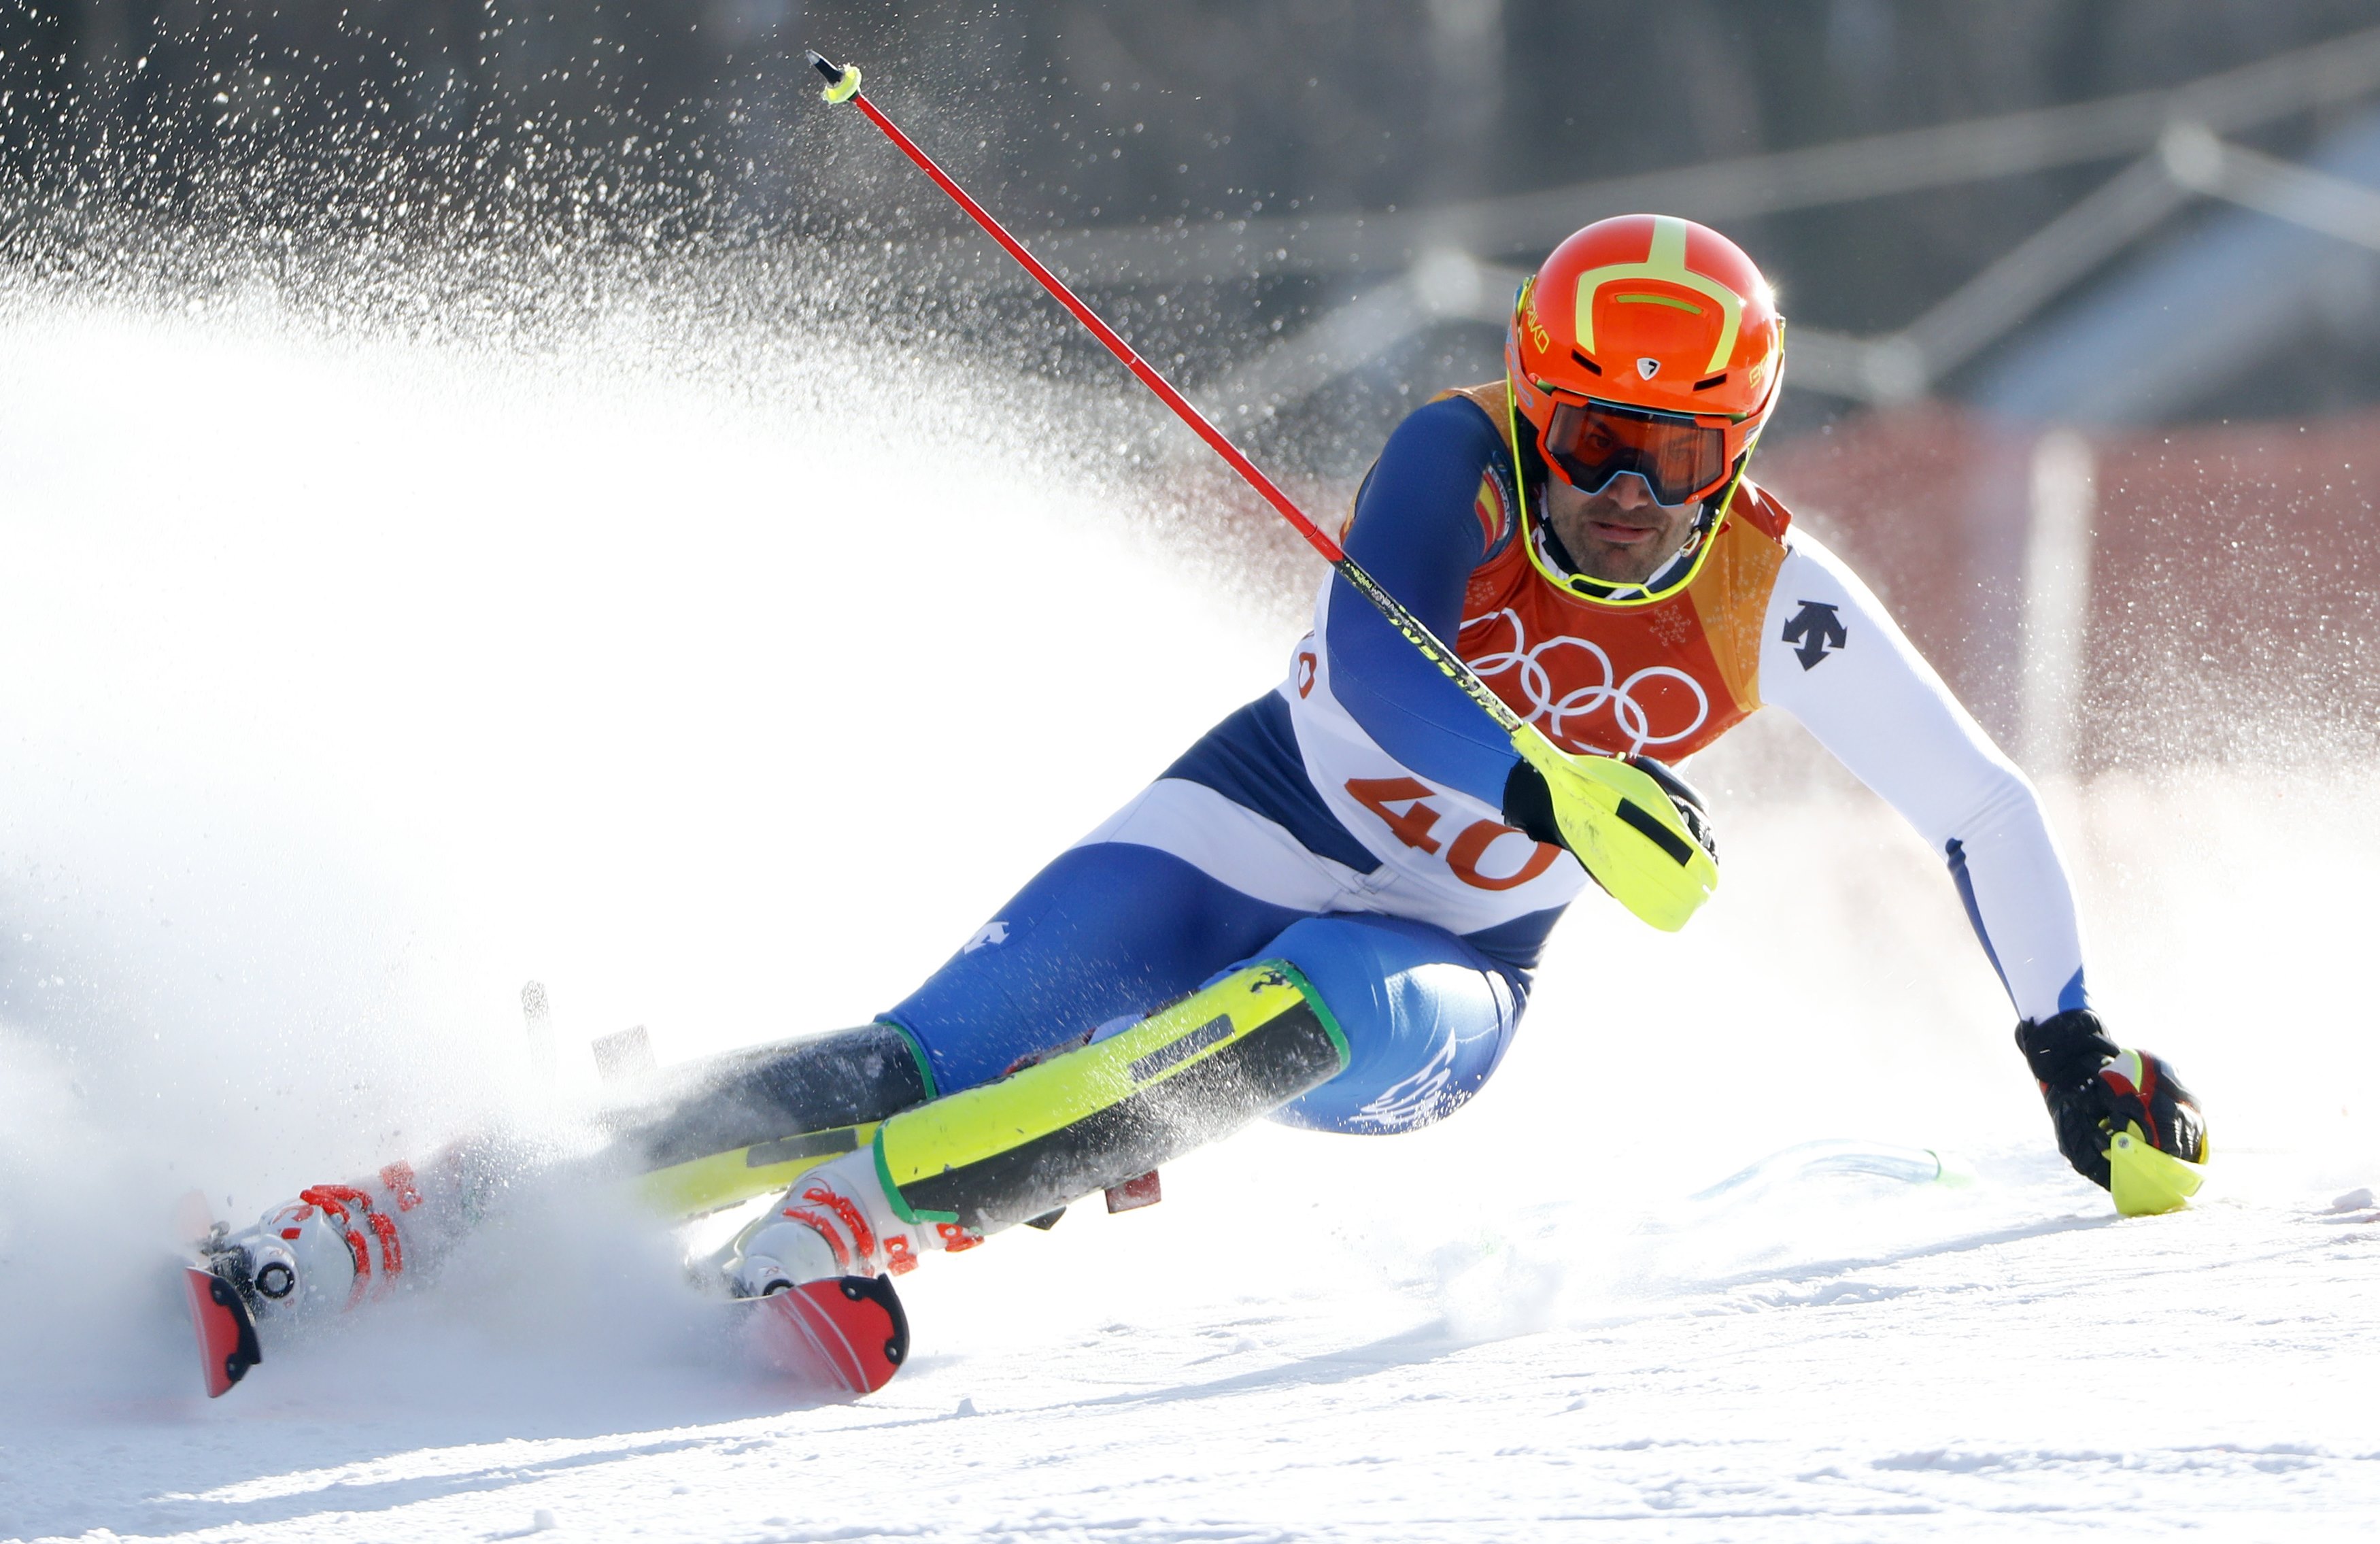 Quim Salarich competing in the Slalom (by Reuters)